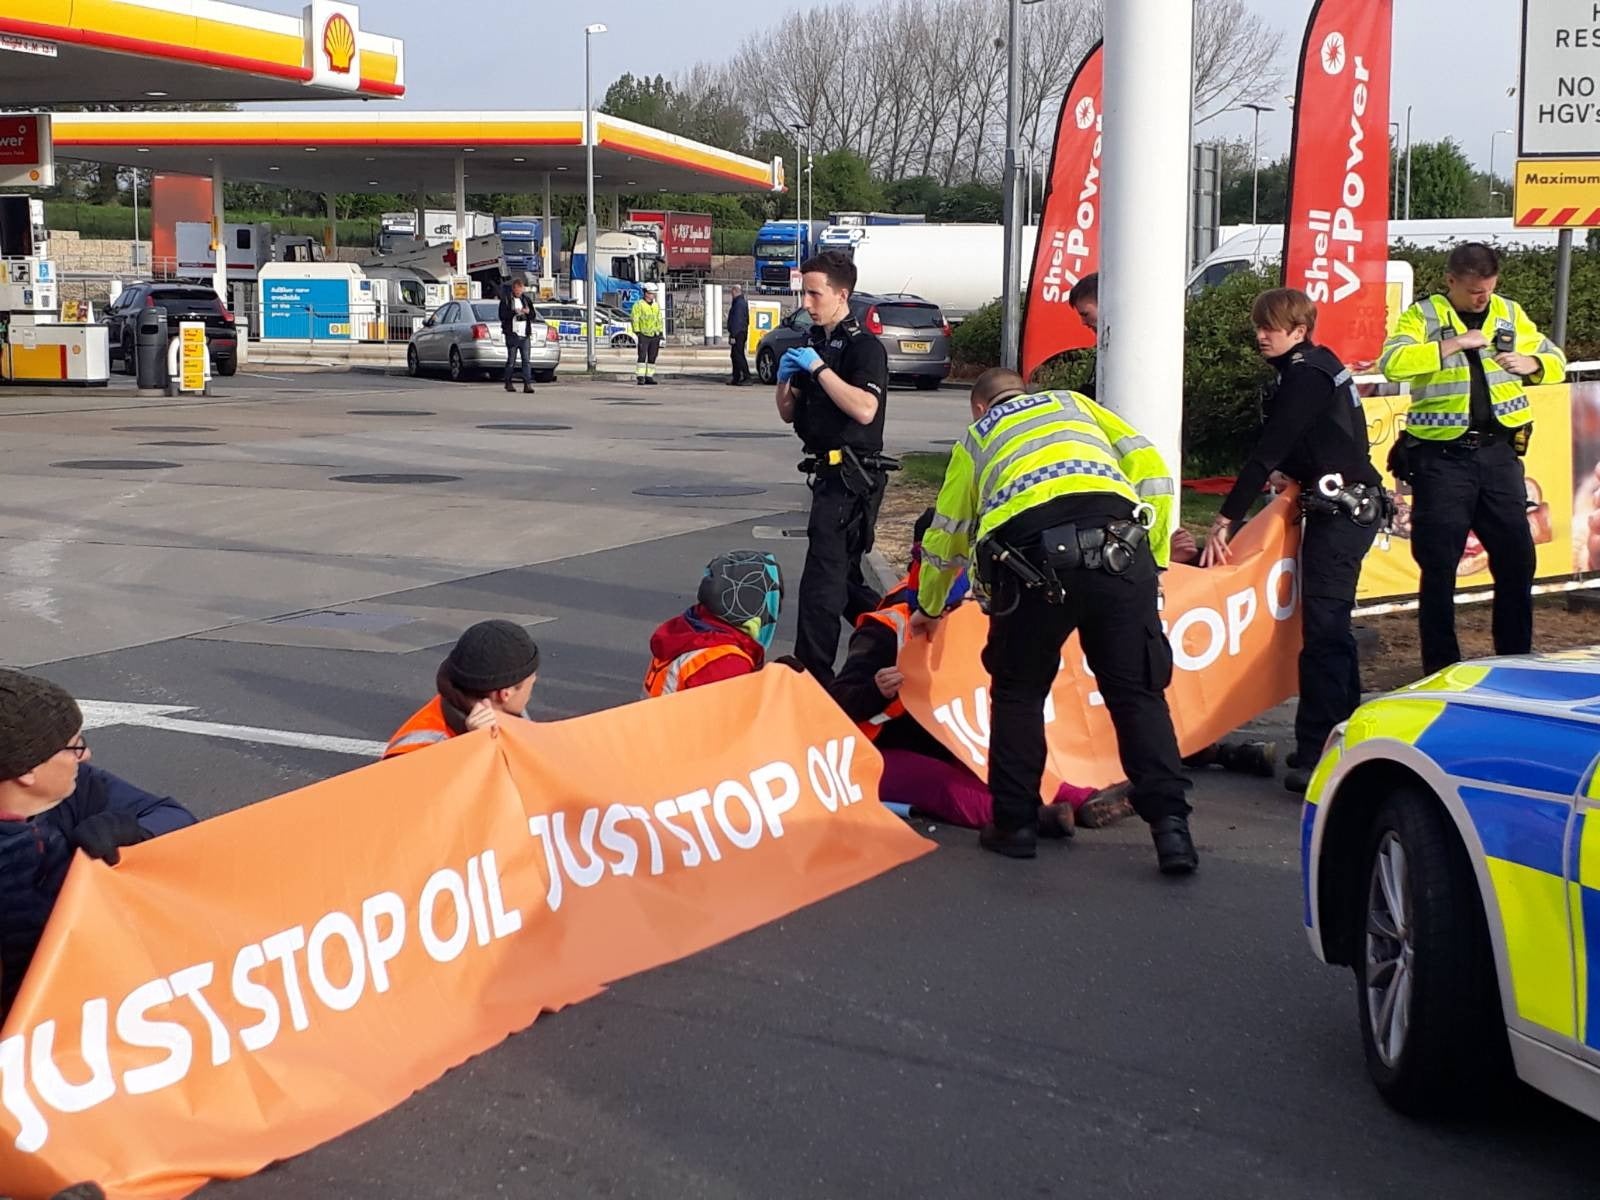 Police at Cobham Services (Just Stop Oil/PA)